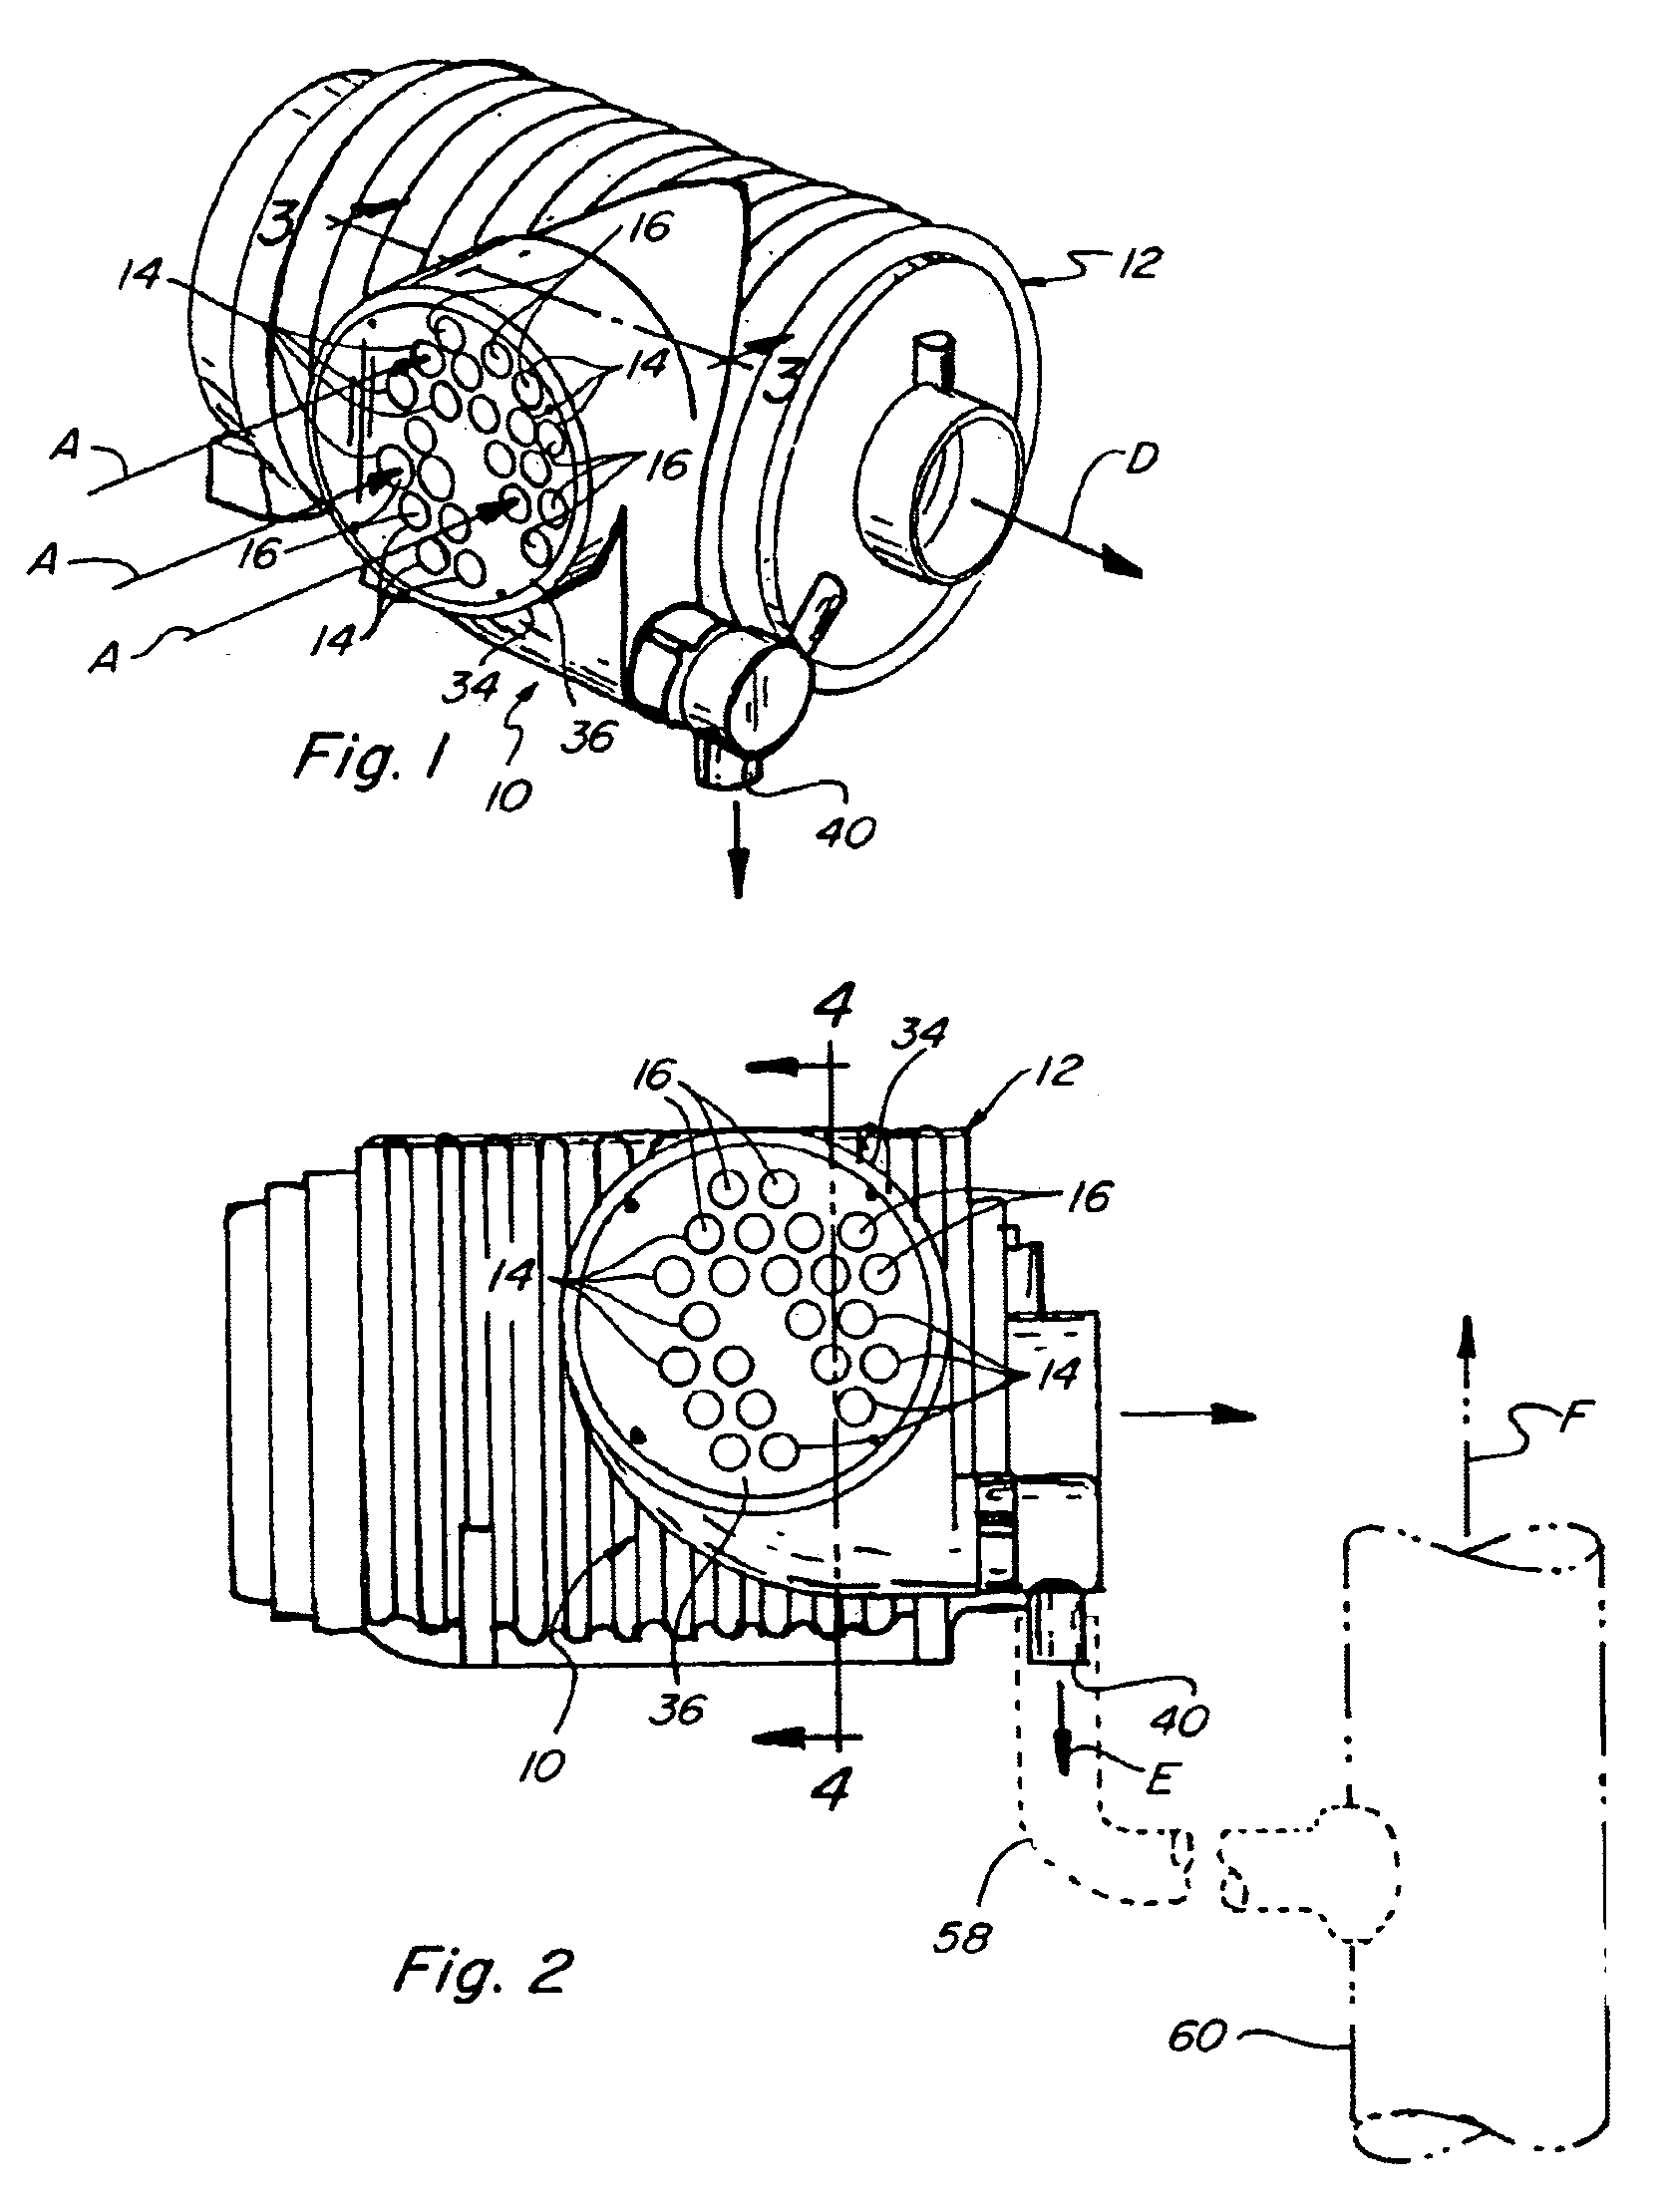 Intake air pre-cleaner with aspirator port chamber for collecting and holding particles for later aspiration